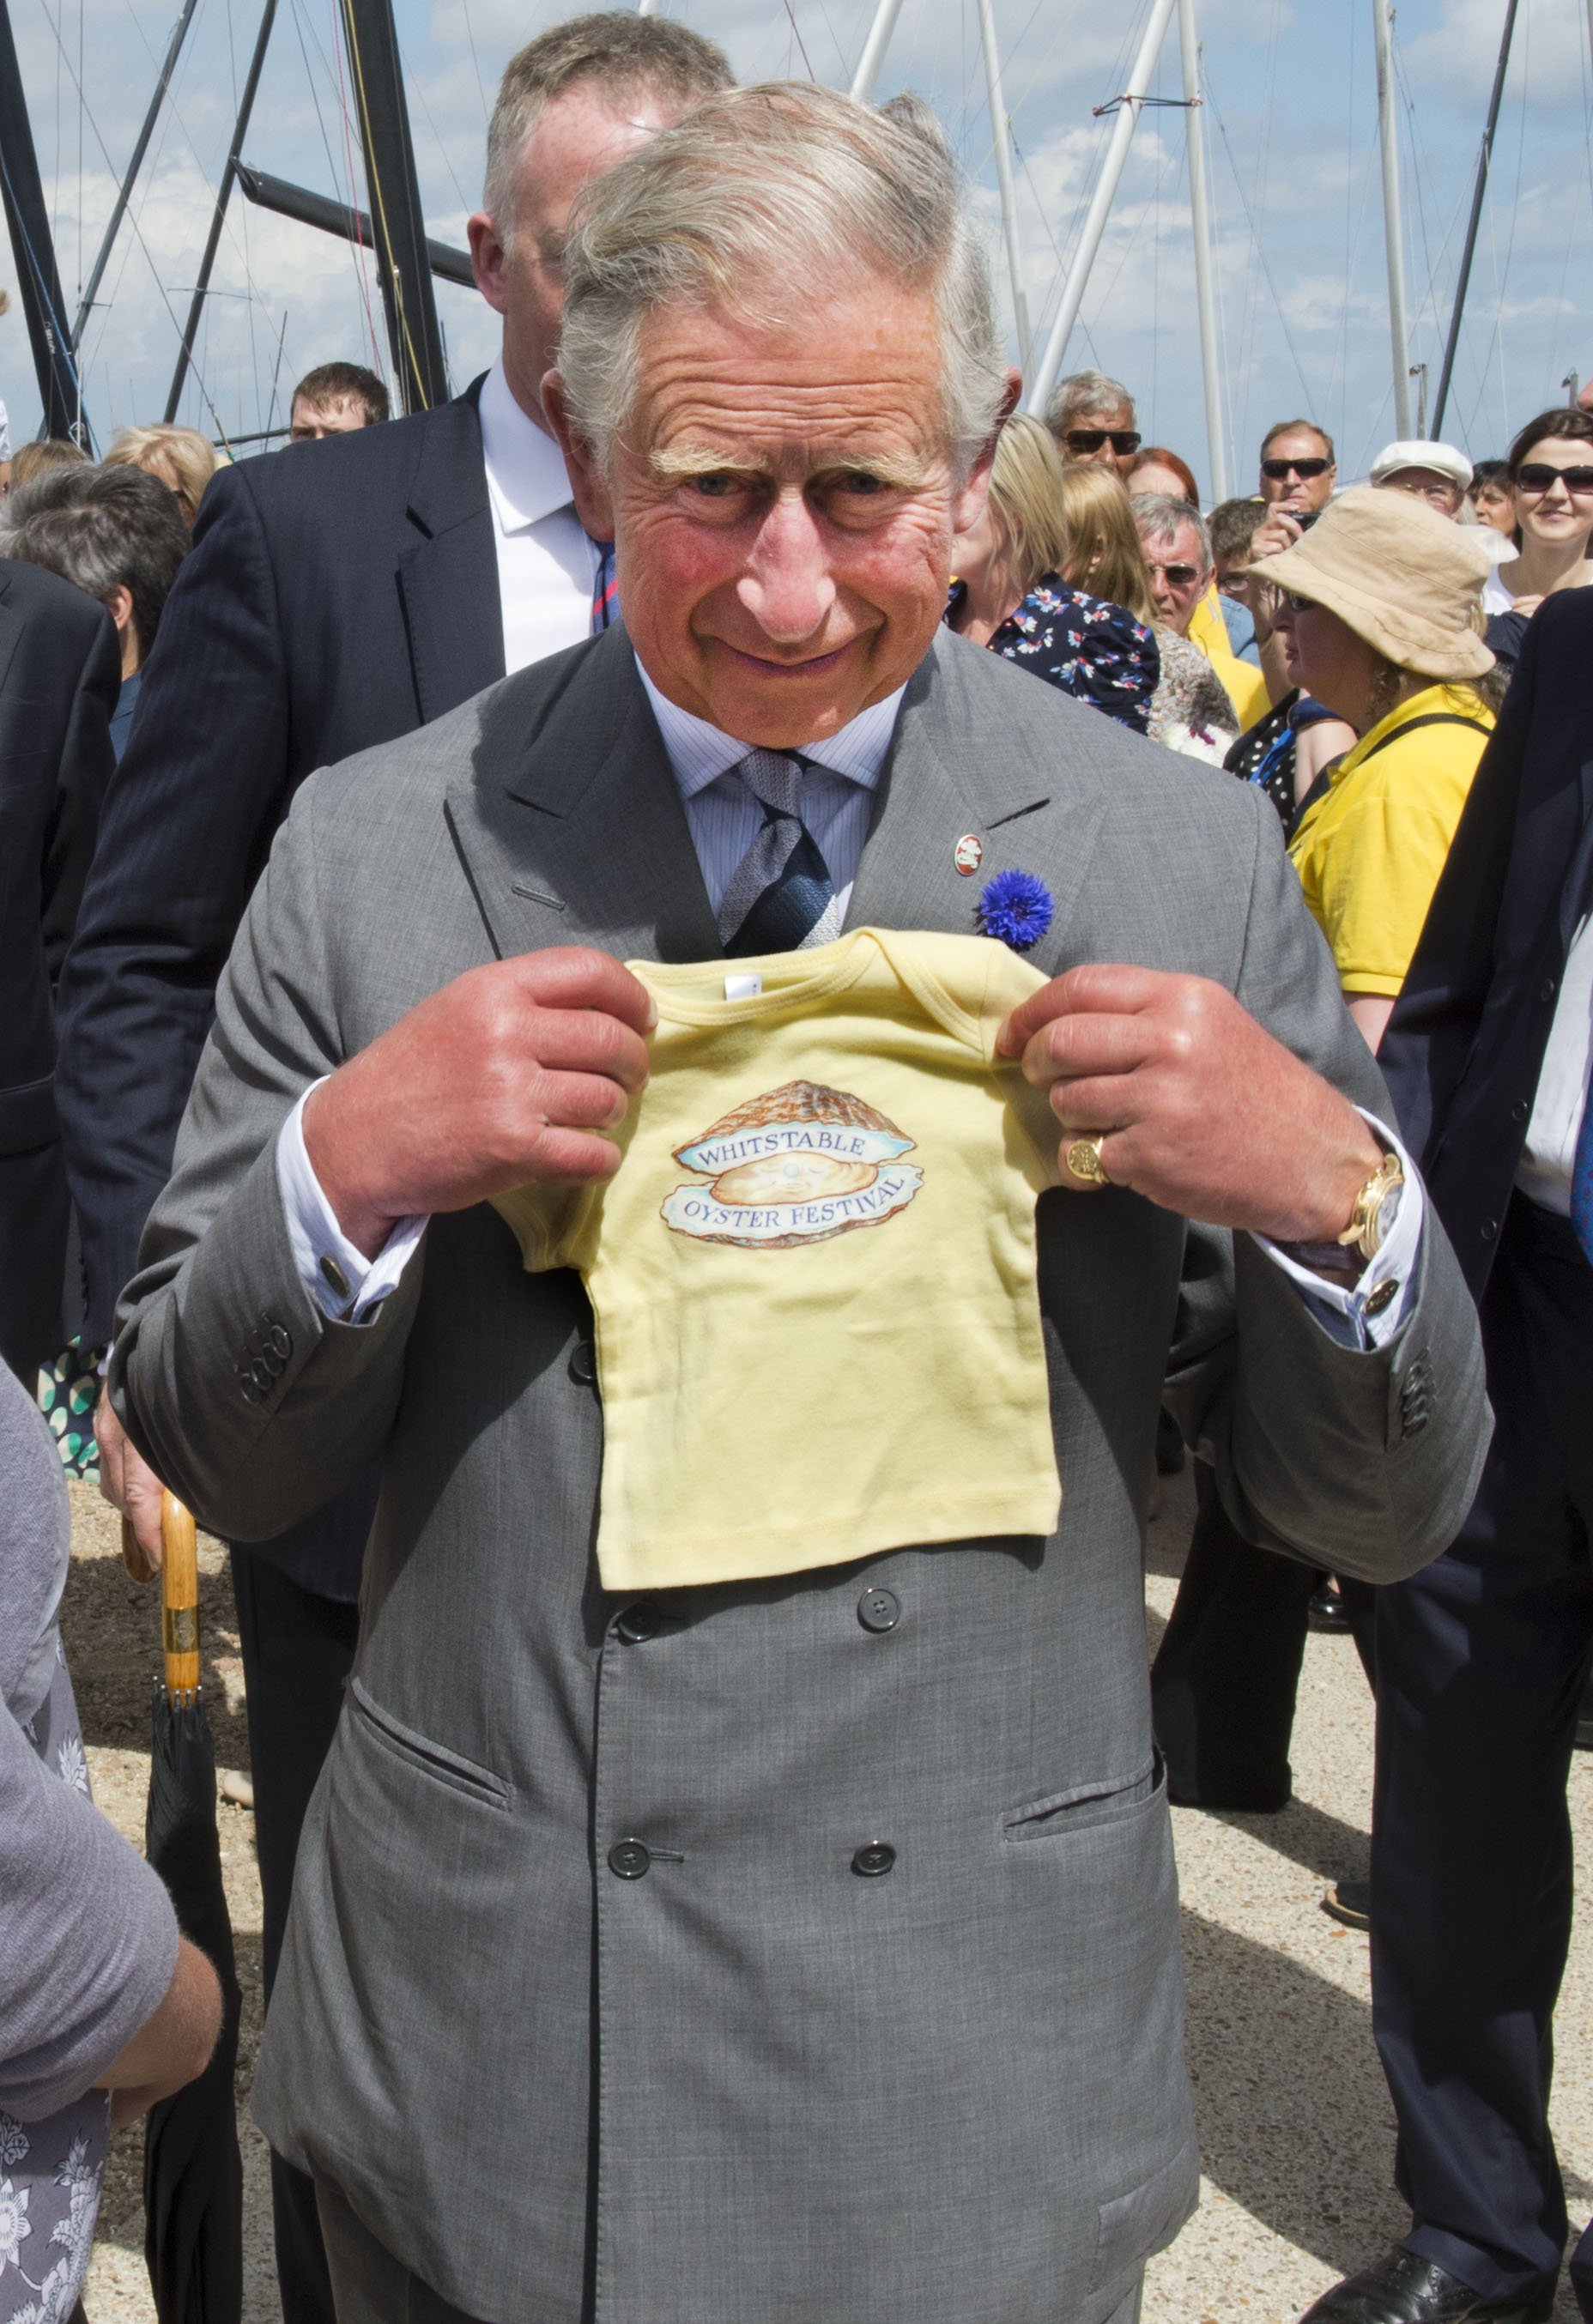 King Charles is seen with a present for his grandson Prince George of Cambridge during a visit to The Whitstable Oyster Festival on July 29, 2013, at Whitstable Harbour, Whitstable, Kent. | Source: Getty Images